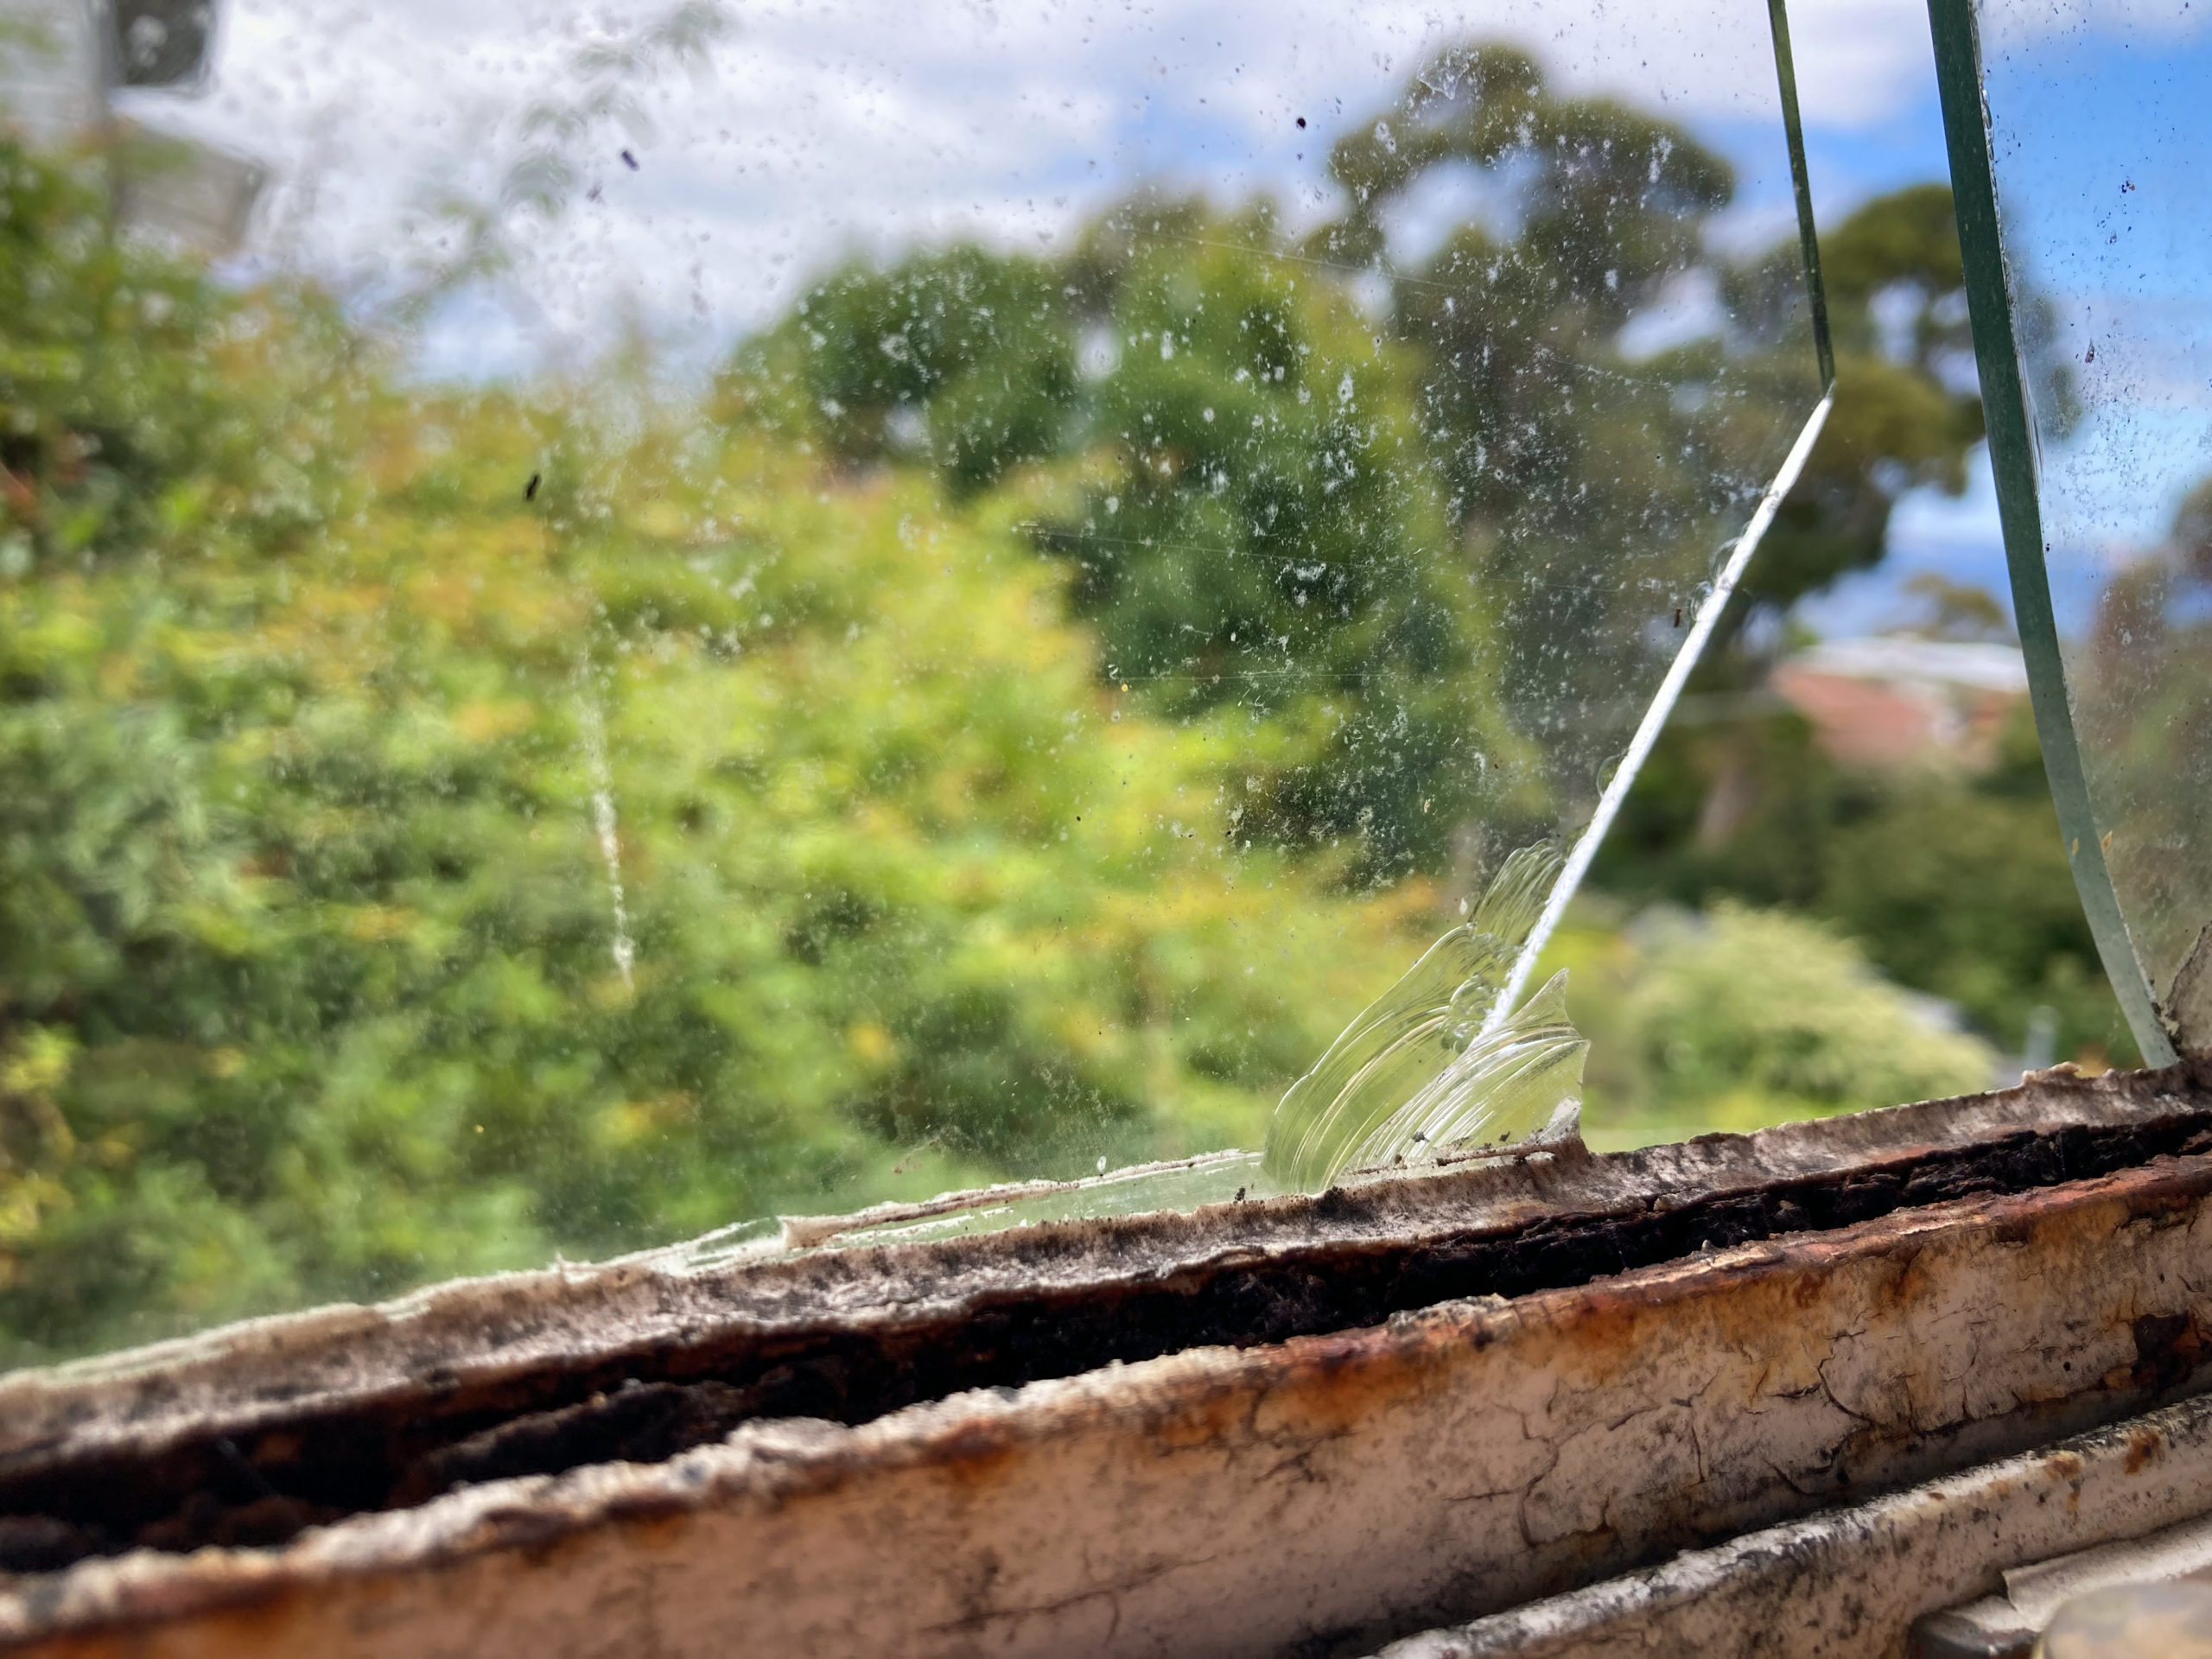 A rusty window frame with a cracked window